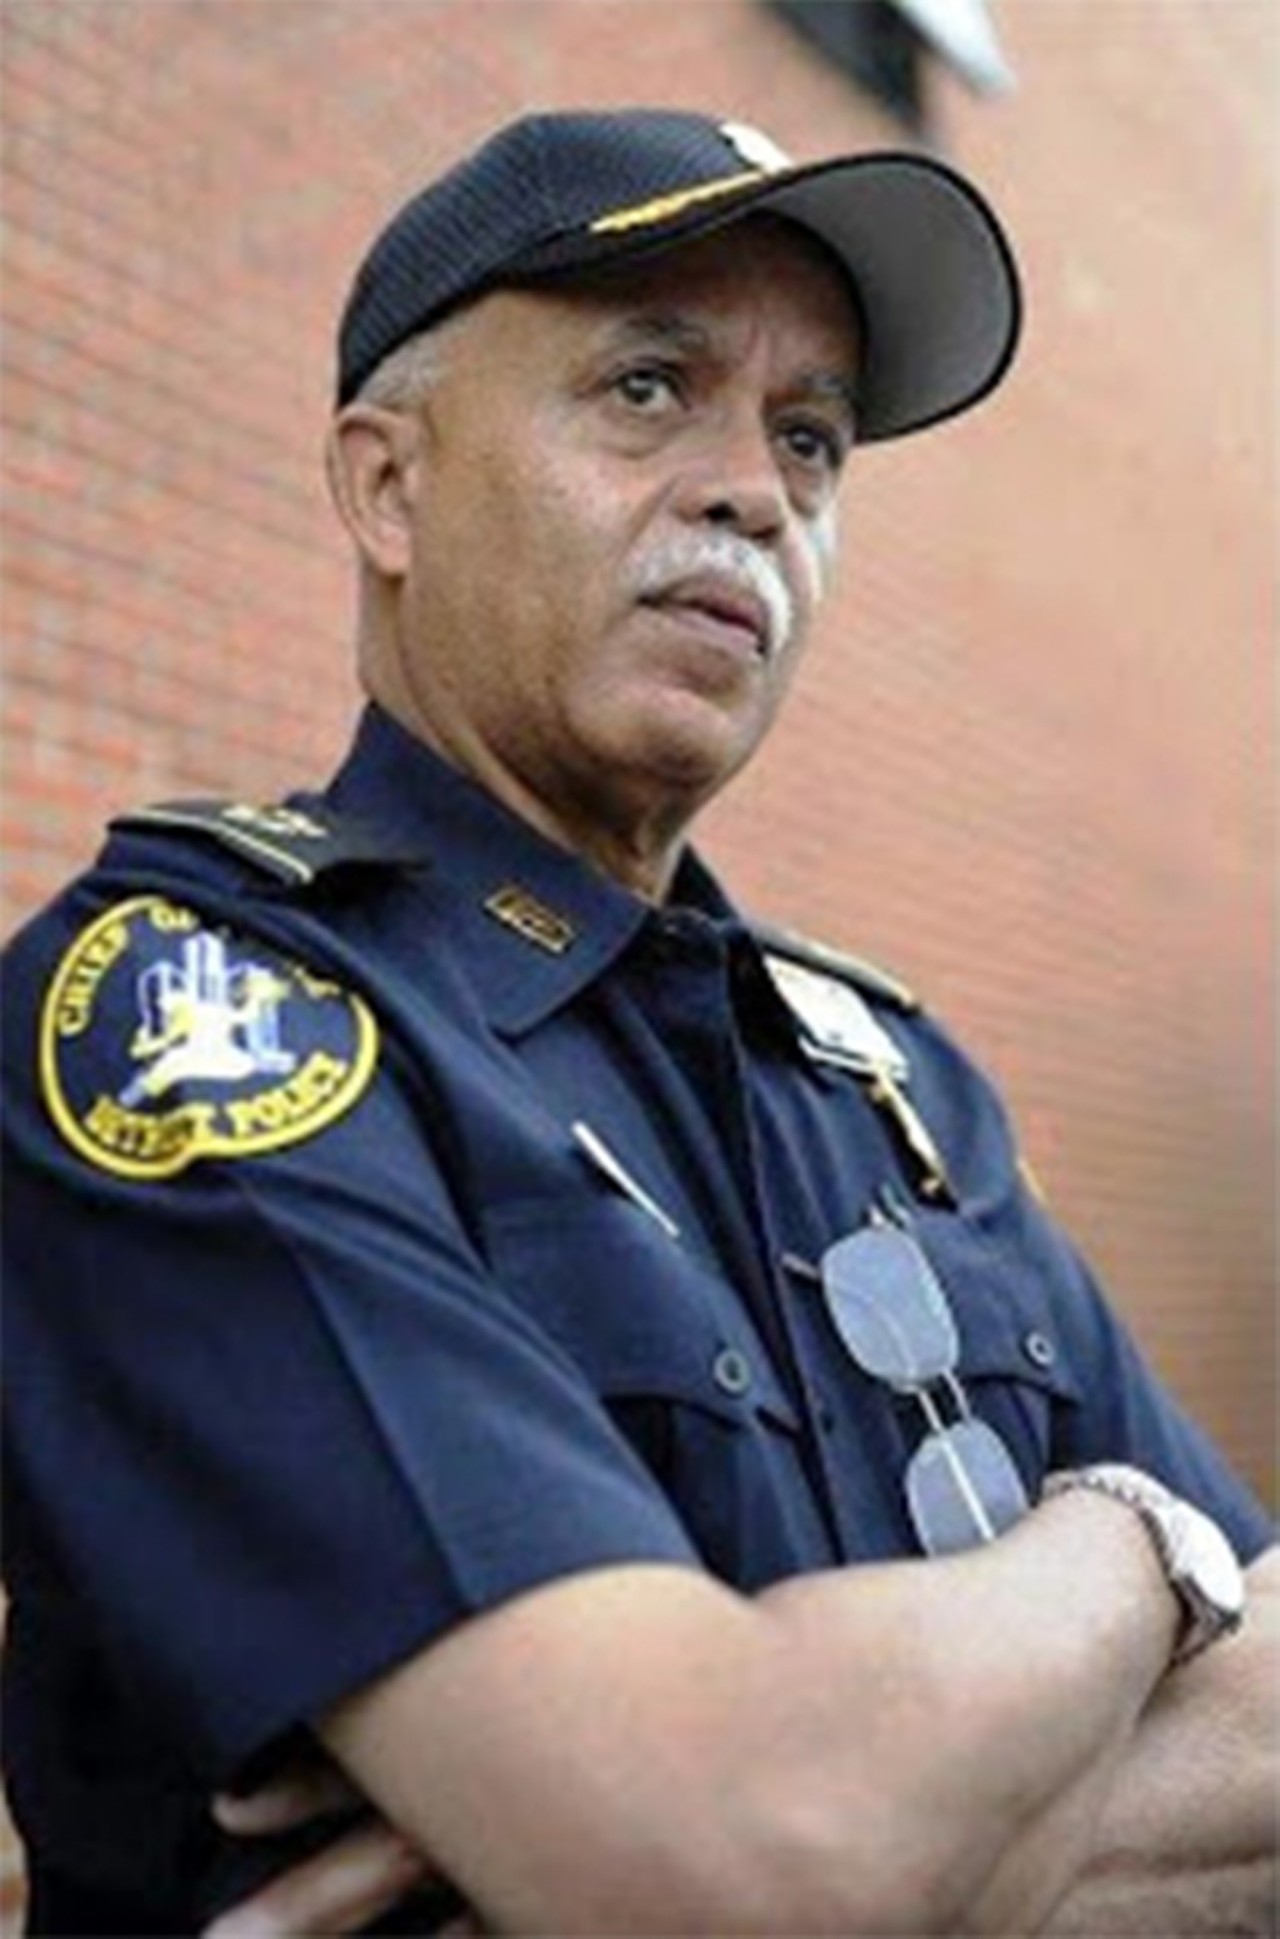   Warren Evans:    A former Wayne County sheriff, Evans was appointed police chief by Detroit Mayor Dave Bing in 2009.  While his record heading up the department was spotty, it was his complete lack of judgment that got him sacked.  Bing said he fired Evans after the chief took part in a promotional video for a cable police reality show.  Bing followed up his first comments by also noting he fired Evans because the chief was romantically involved with Lt. Monique Patterson.